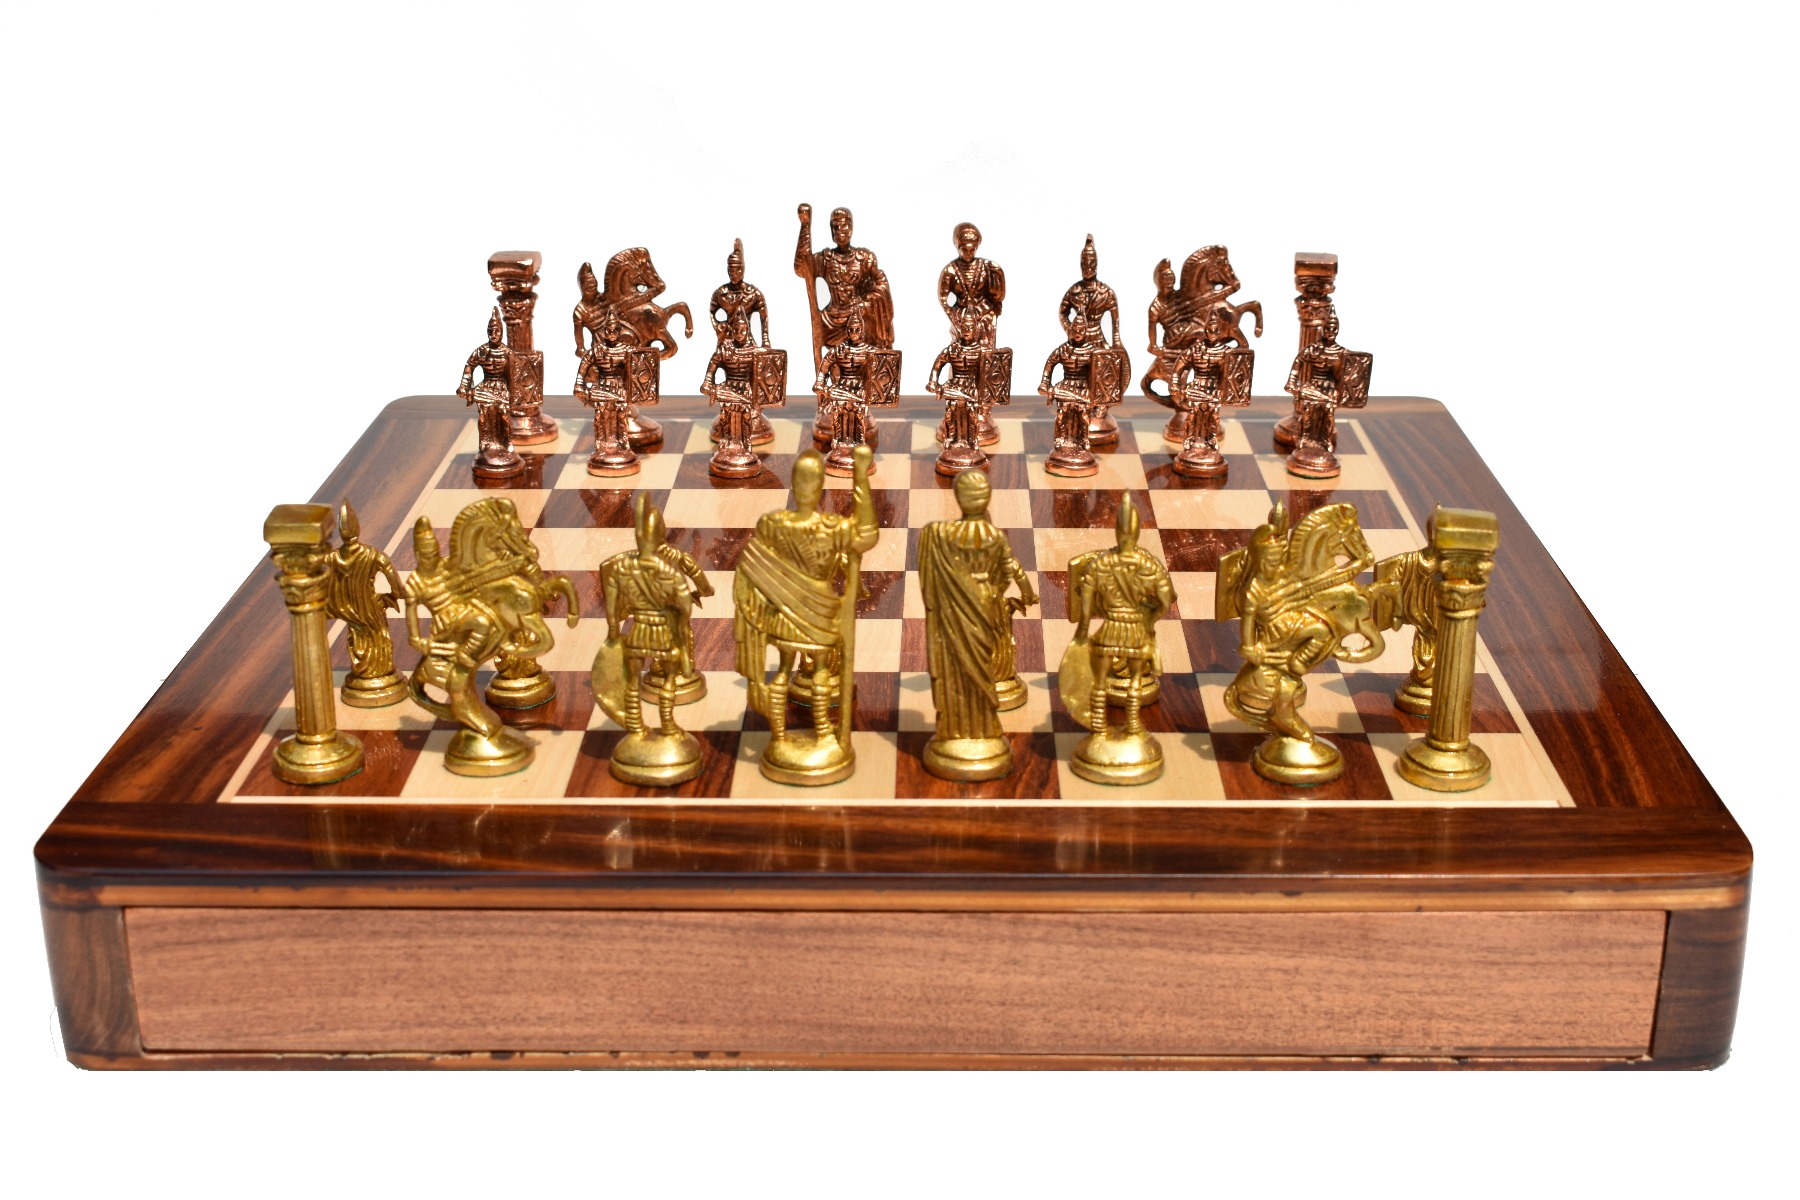  Luxury Chess Board Game Set Collectible Handmade